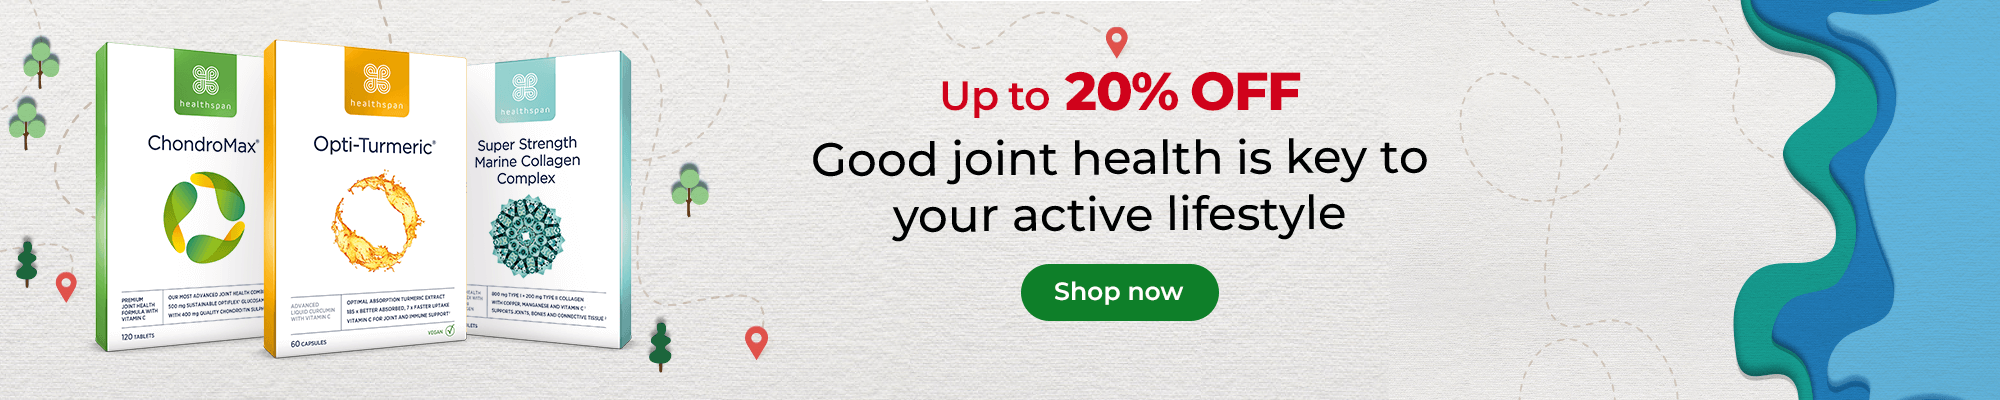 Up to 20% off. Good joint health is key to your active lifestyle. Shop now